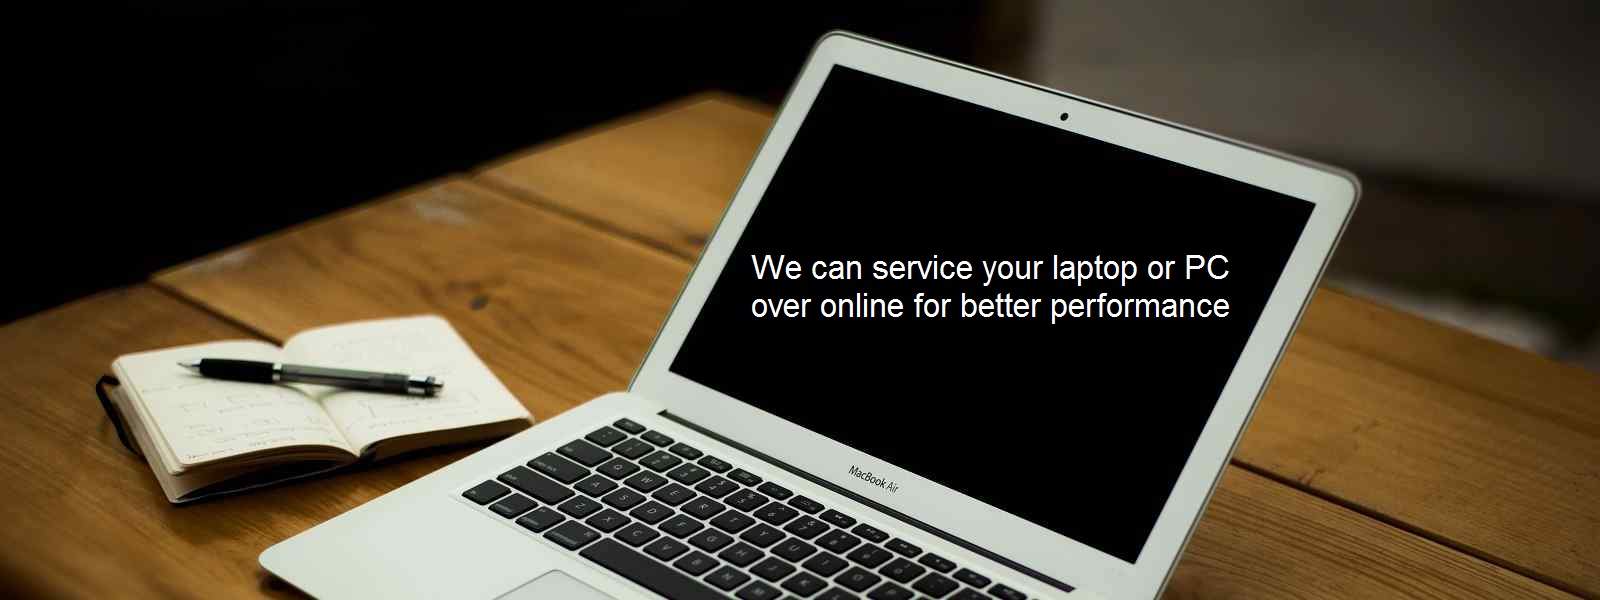 We can service your laptop or PC over online for better performance.